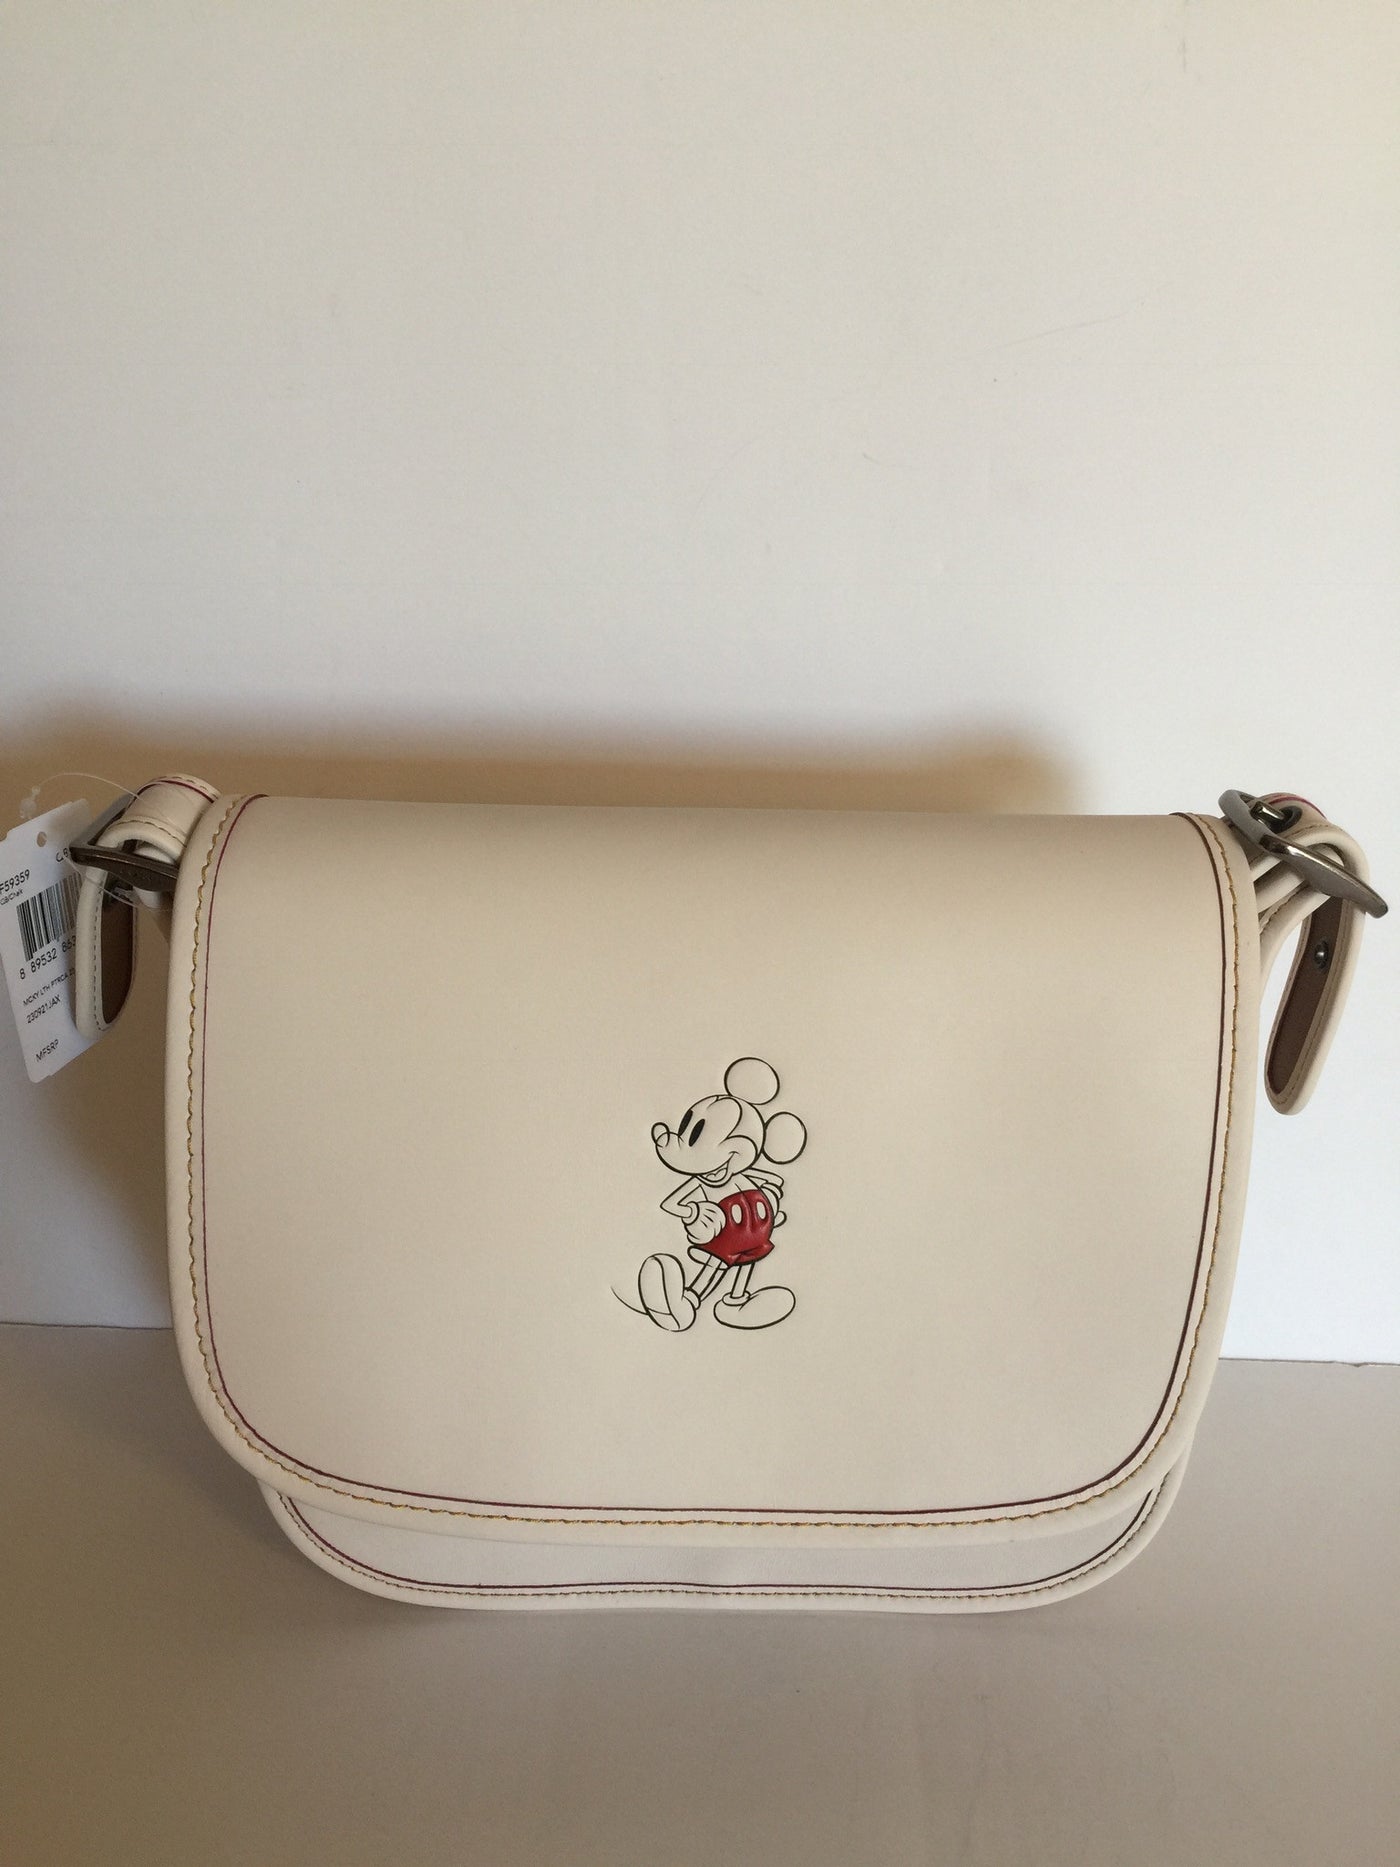 Disney X Coach Mickey Leather Patricia 23 Shoulder Bag Chalk White New with Tags